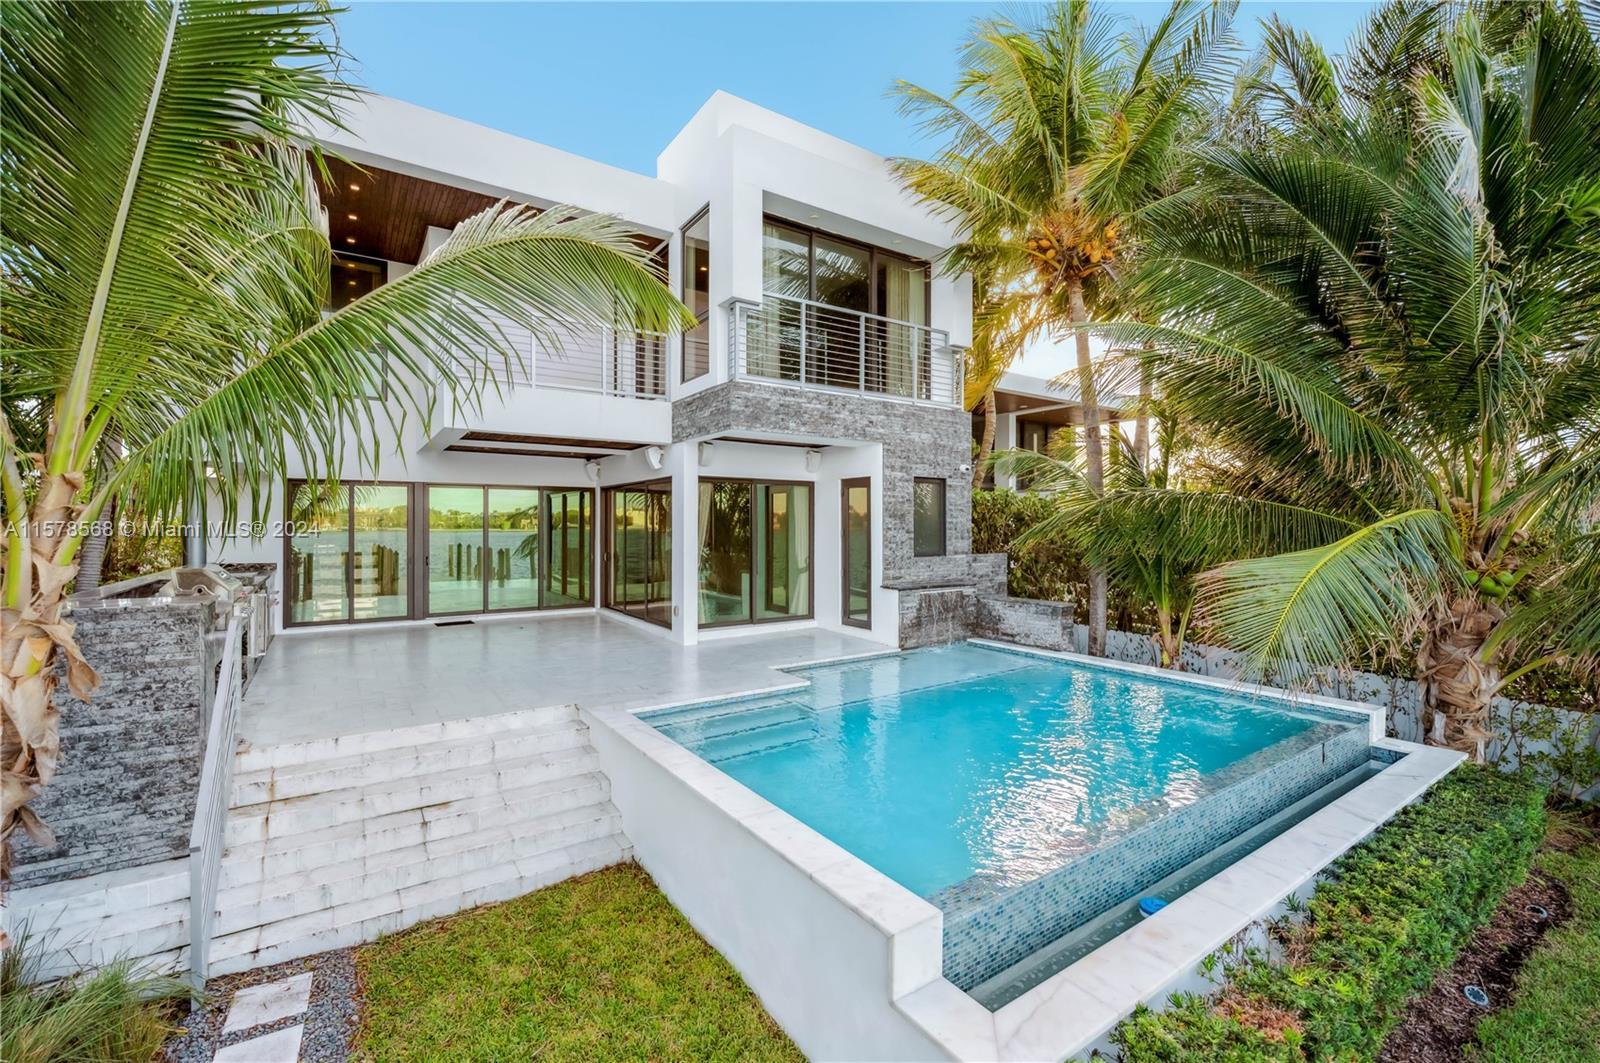 What an incredible location! Being in a gated community in Miami Beach, neighboring Indian Creek, on